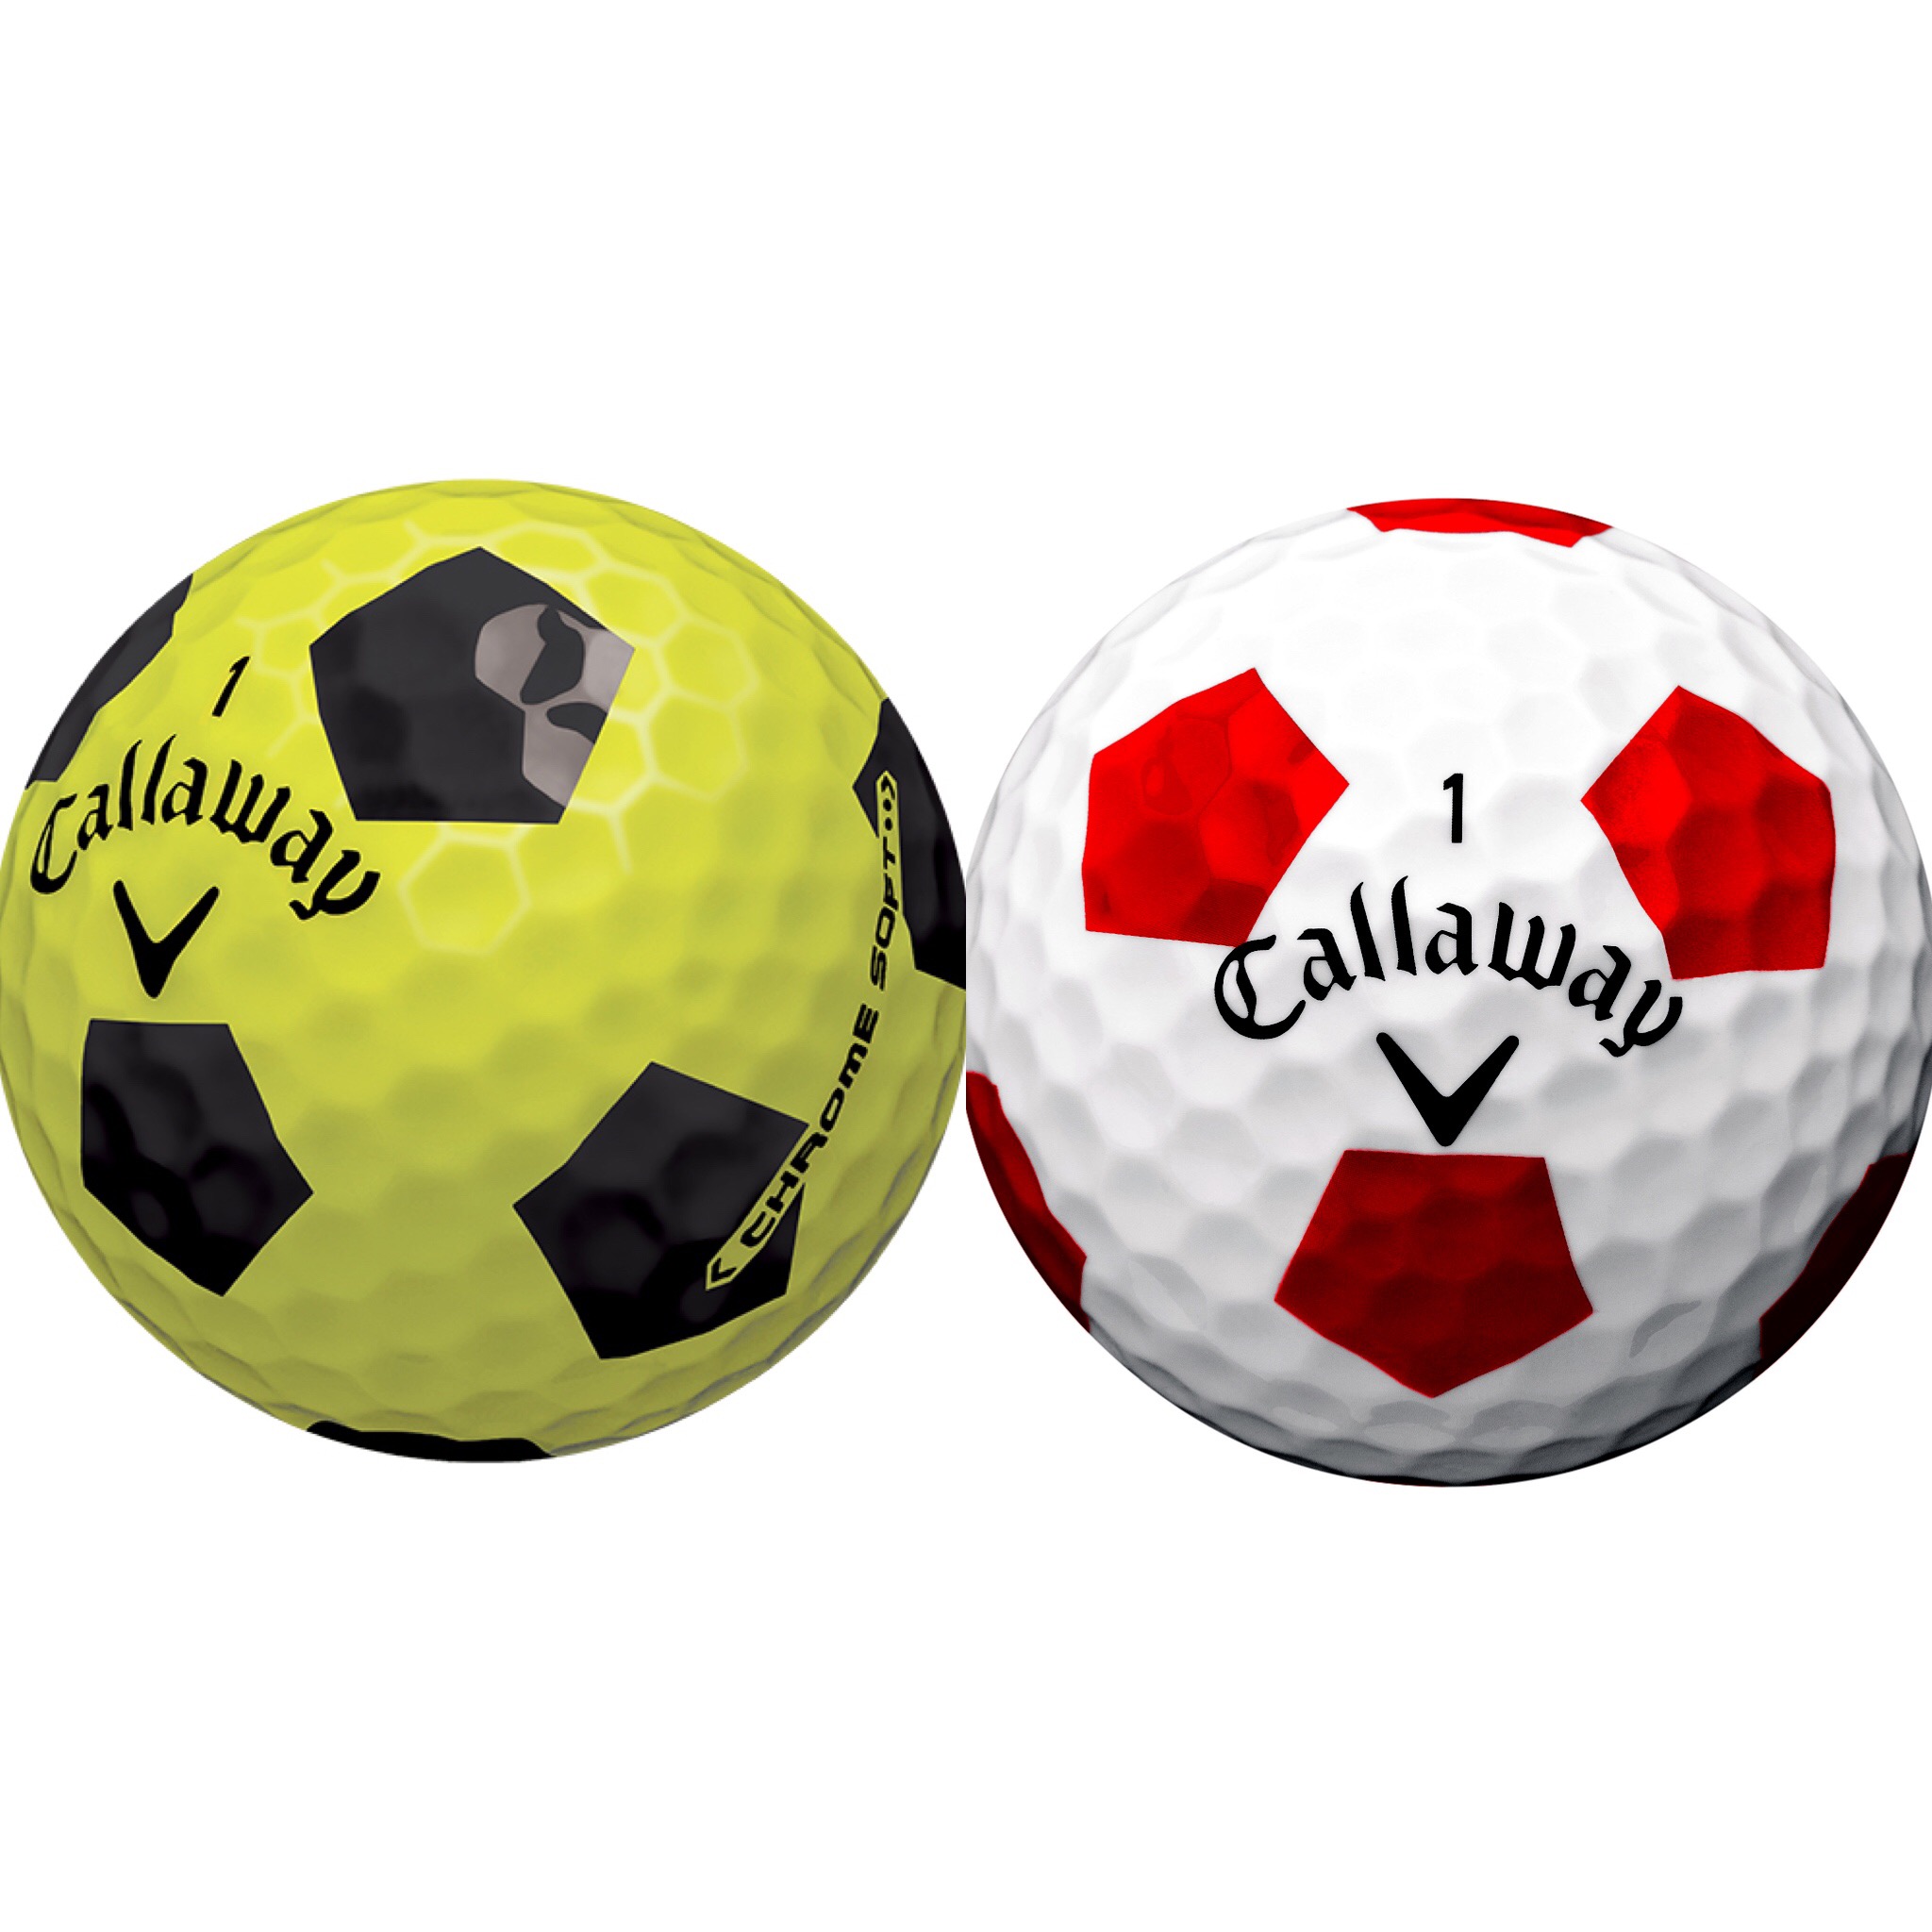 Callaway High Quality Background on Wallpapers Vista